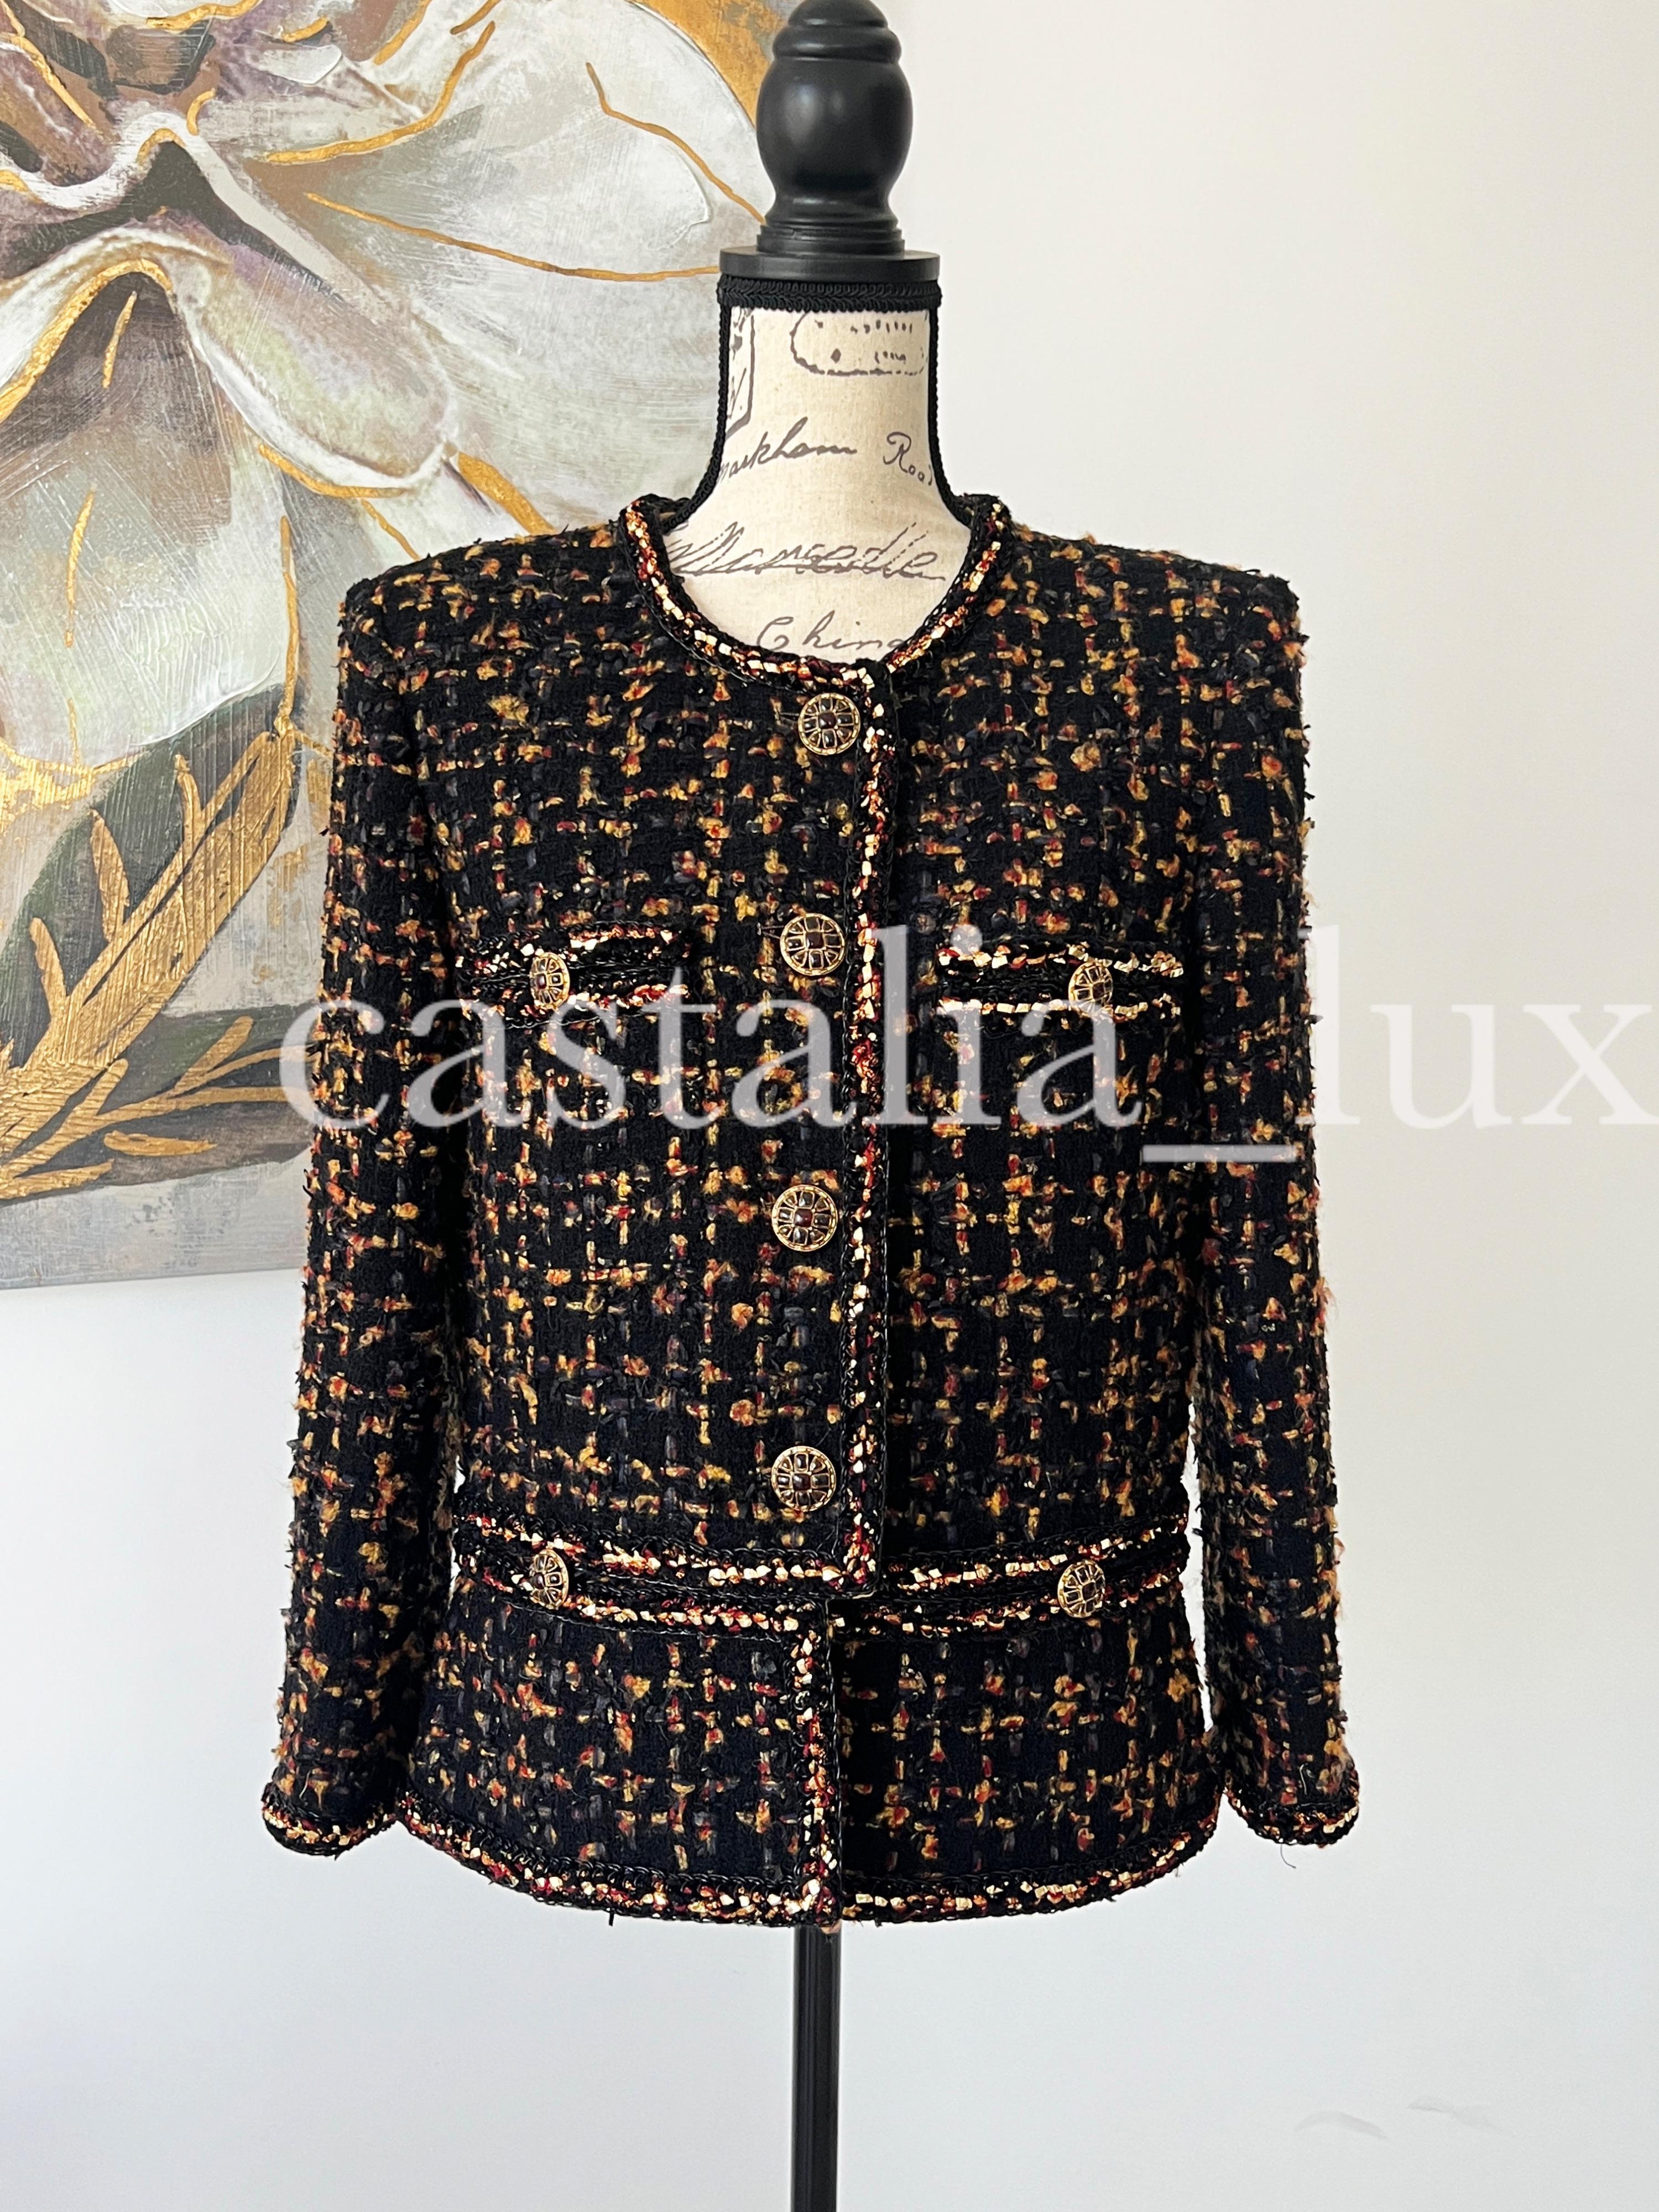 Women's or Men's Chanel New 2019 Most Hunted Black Tweed Jacket For Sale